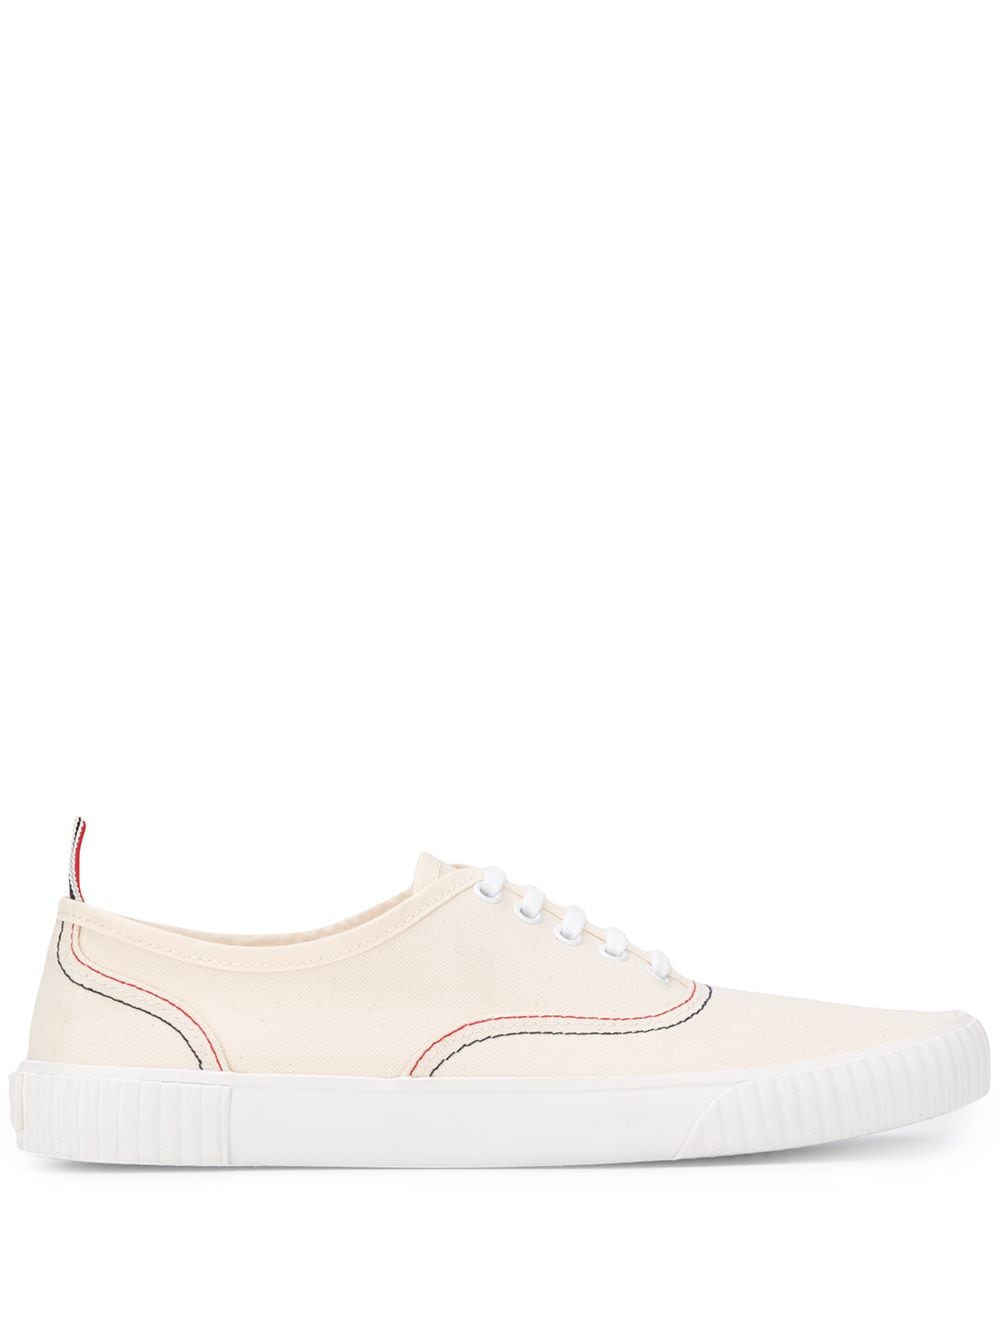 Thom Browne Heritage Canvas Sneakers - Farfetch